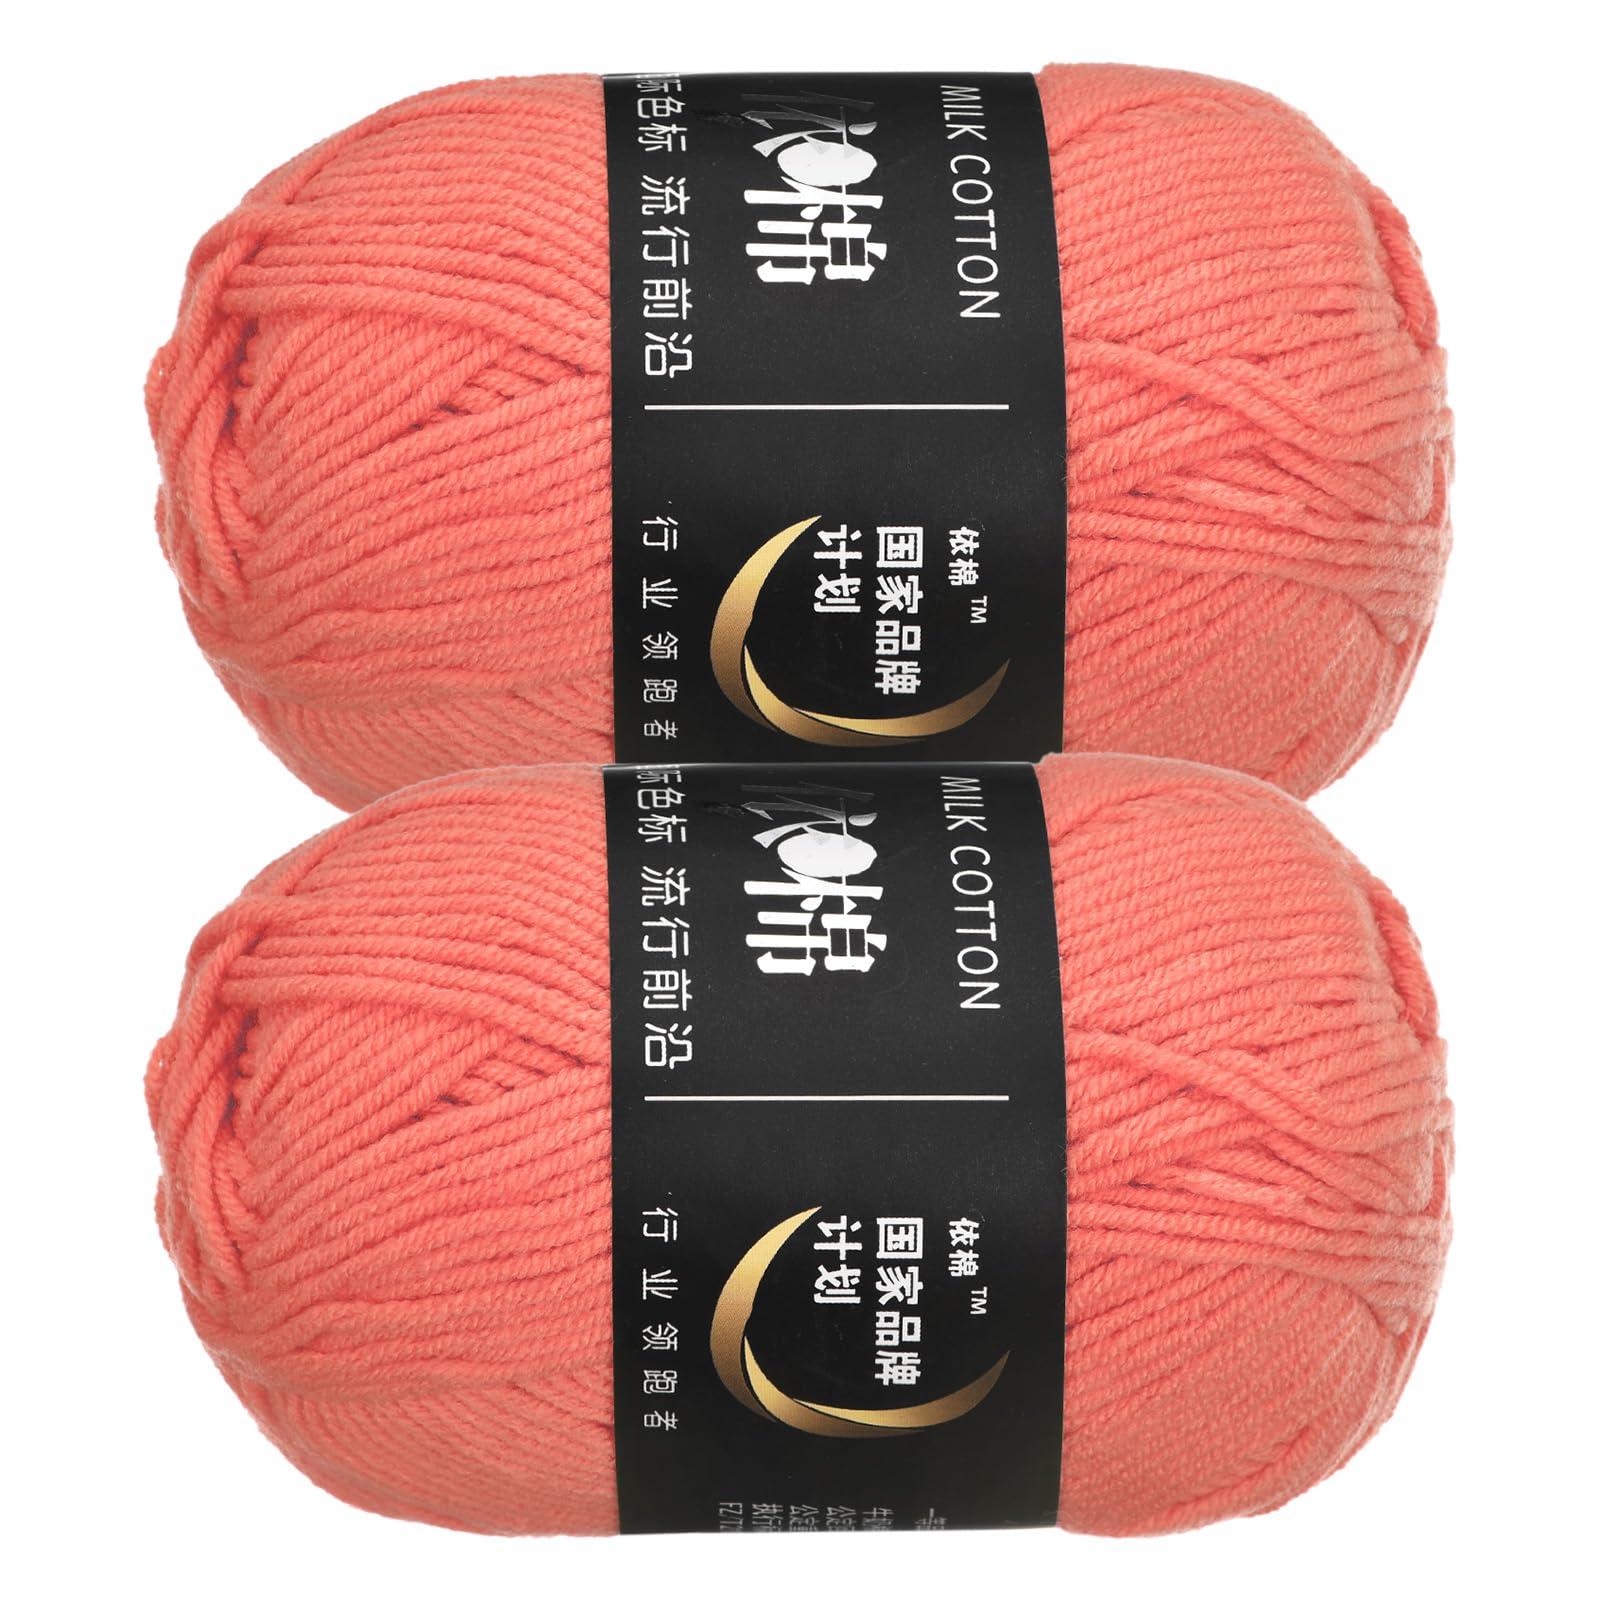 sourcing map Acrylic Yarn Skeins, 2 Pack of 50g/1.76oz Soft Crochet Yarns for Knitting and Crocheting Craft Project, Brick red